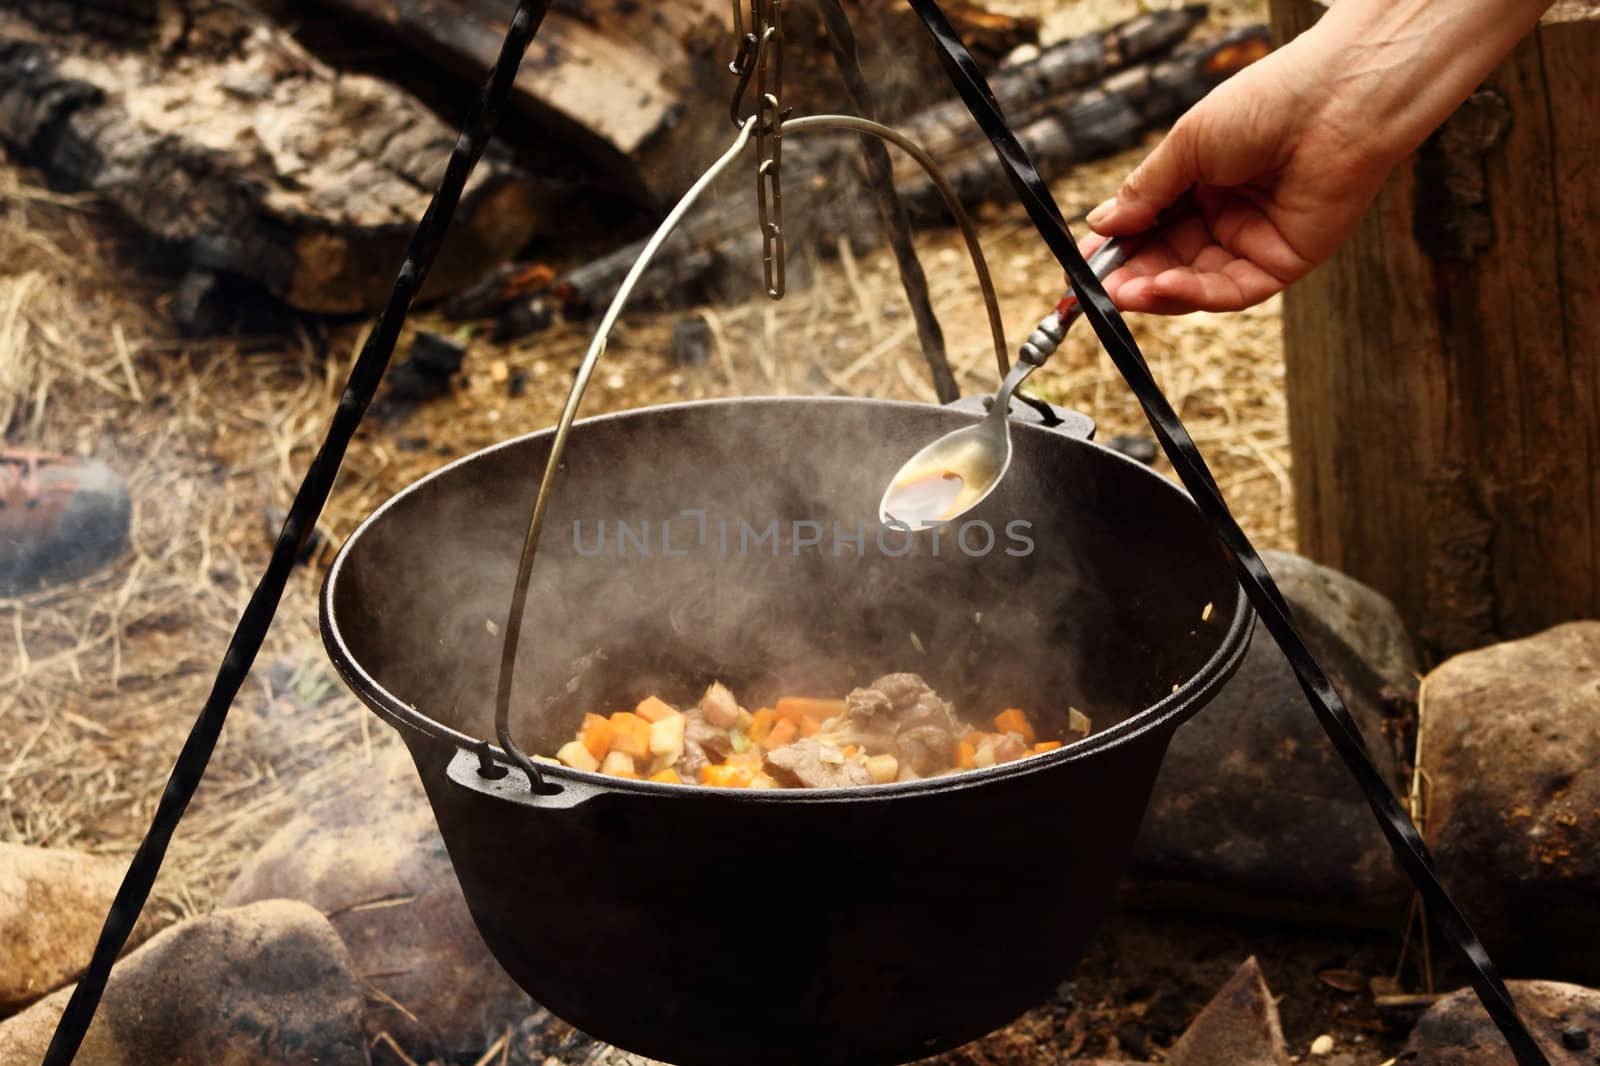 cooking outdoors in a big caldron suspended above the fireplace